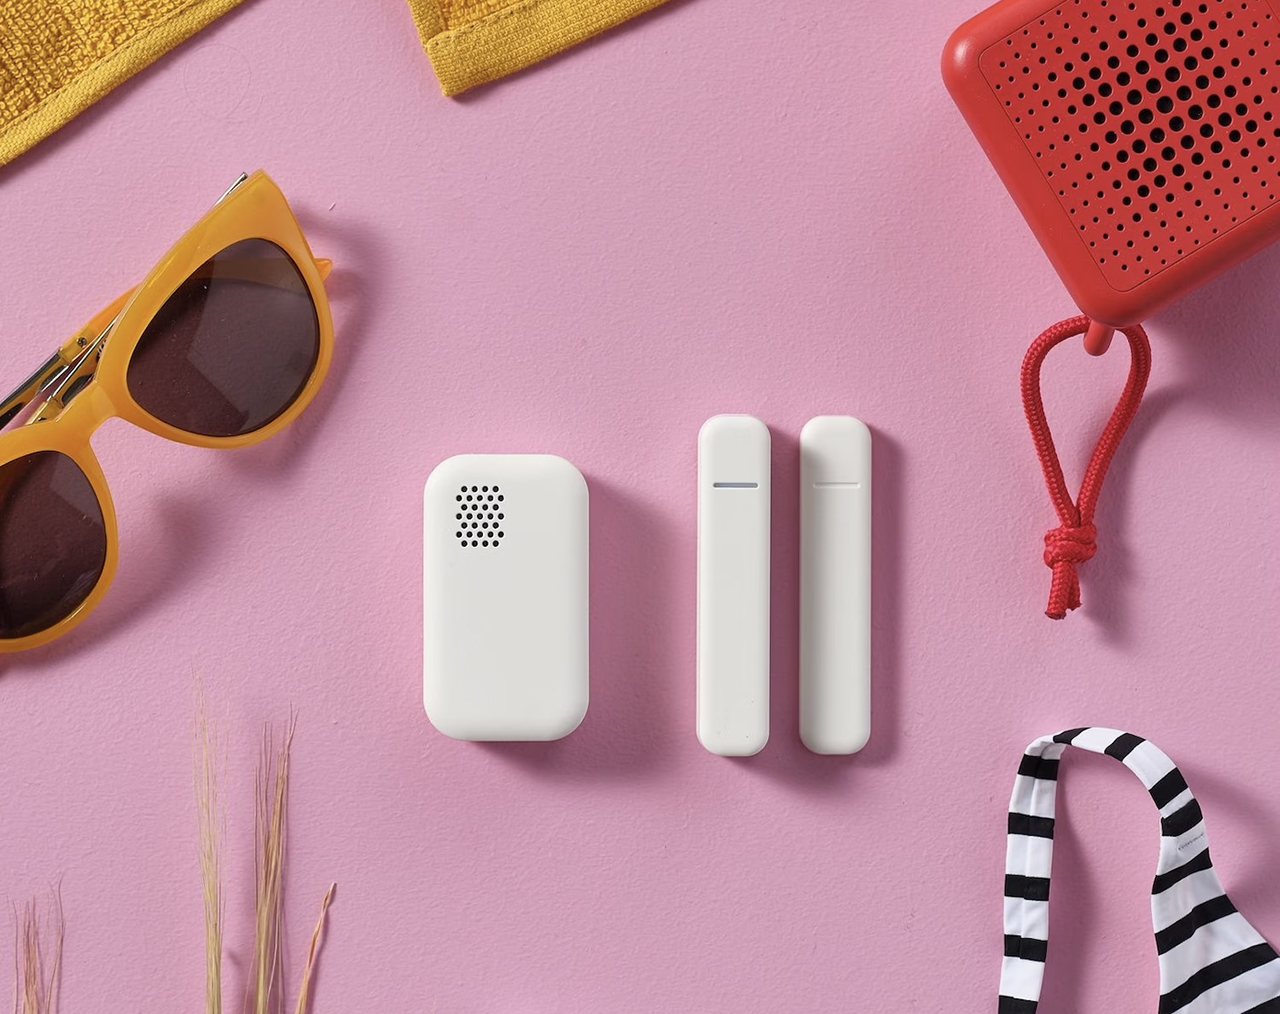 IKEA Enters the Smart Home Monitoring Game With a Trio of Safety Sensors